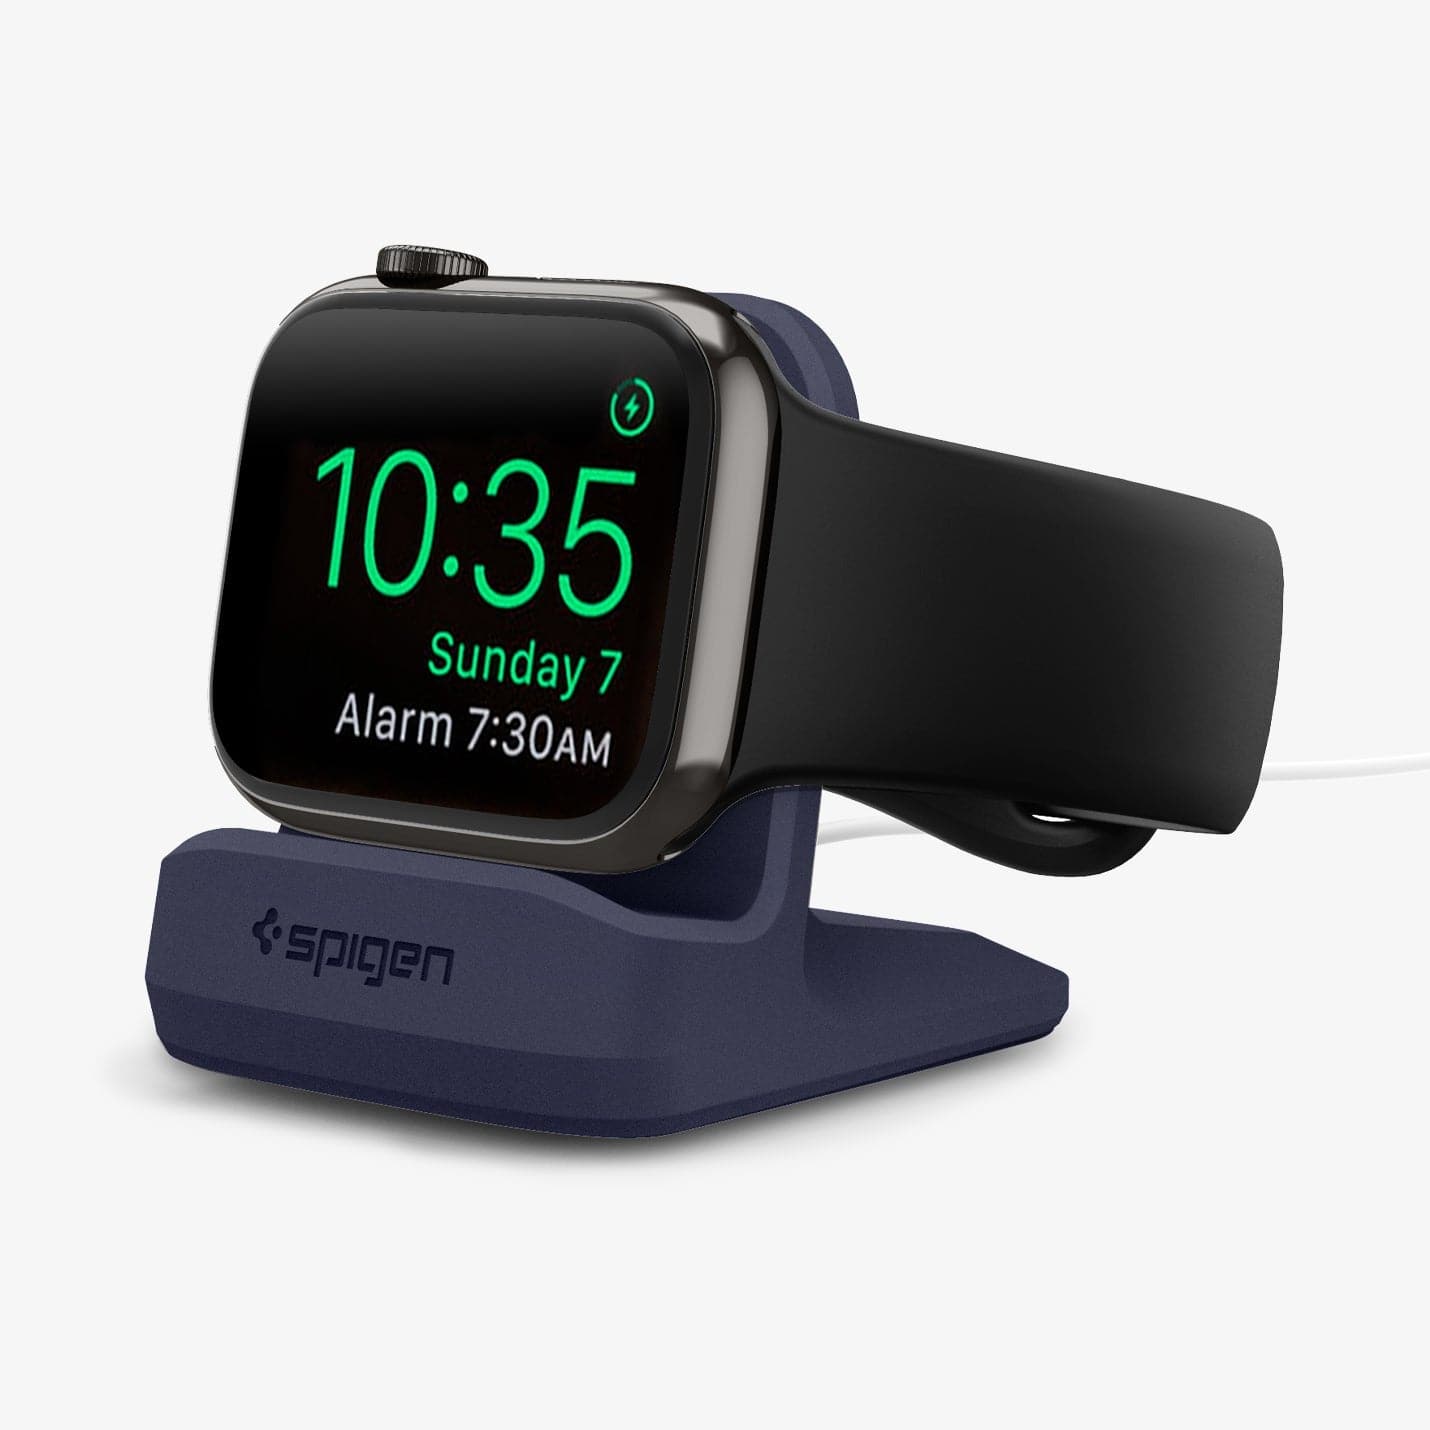 000CD21182 - Apple Watch Night Stand S350 in midnight blue showing the front and side with watch on stand